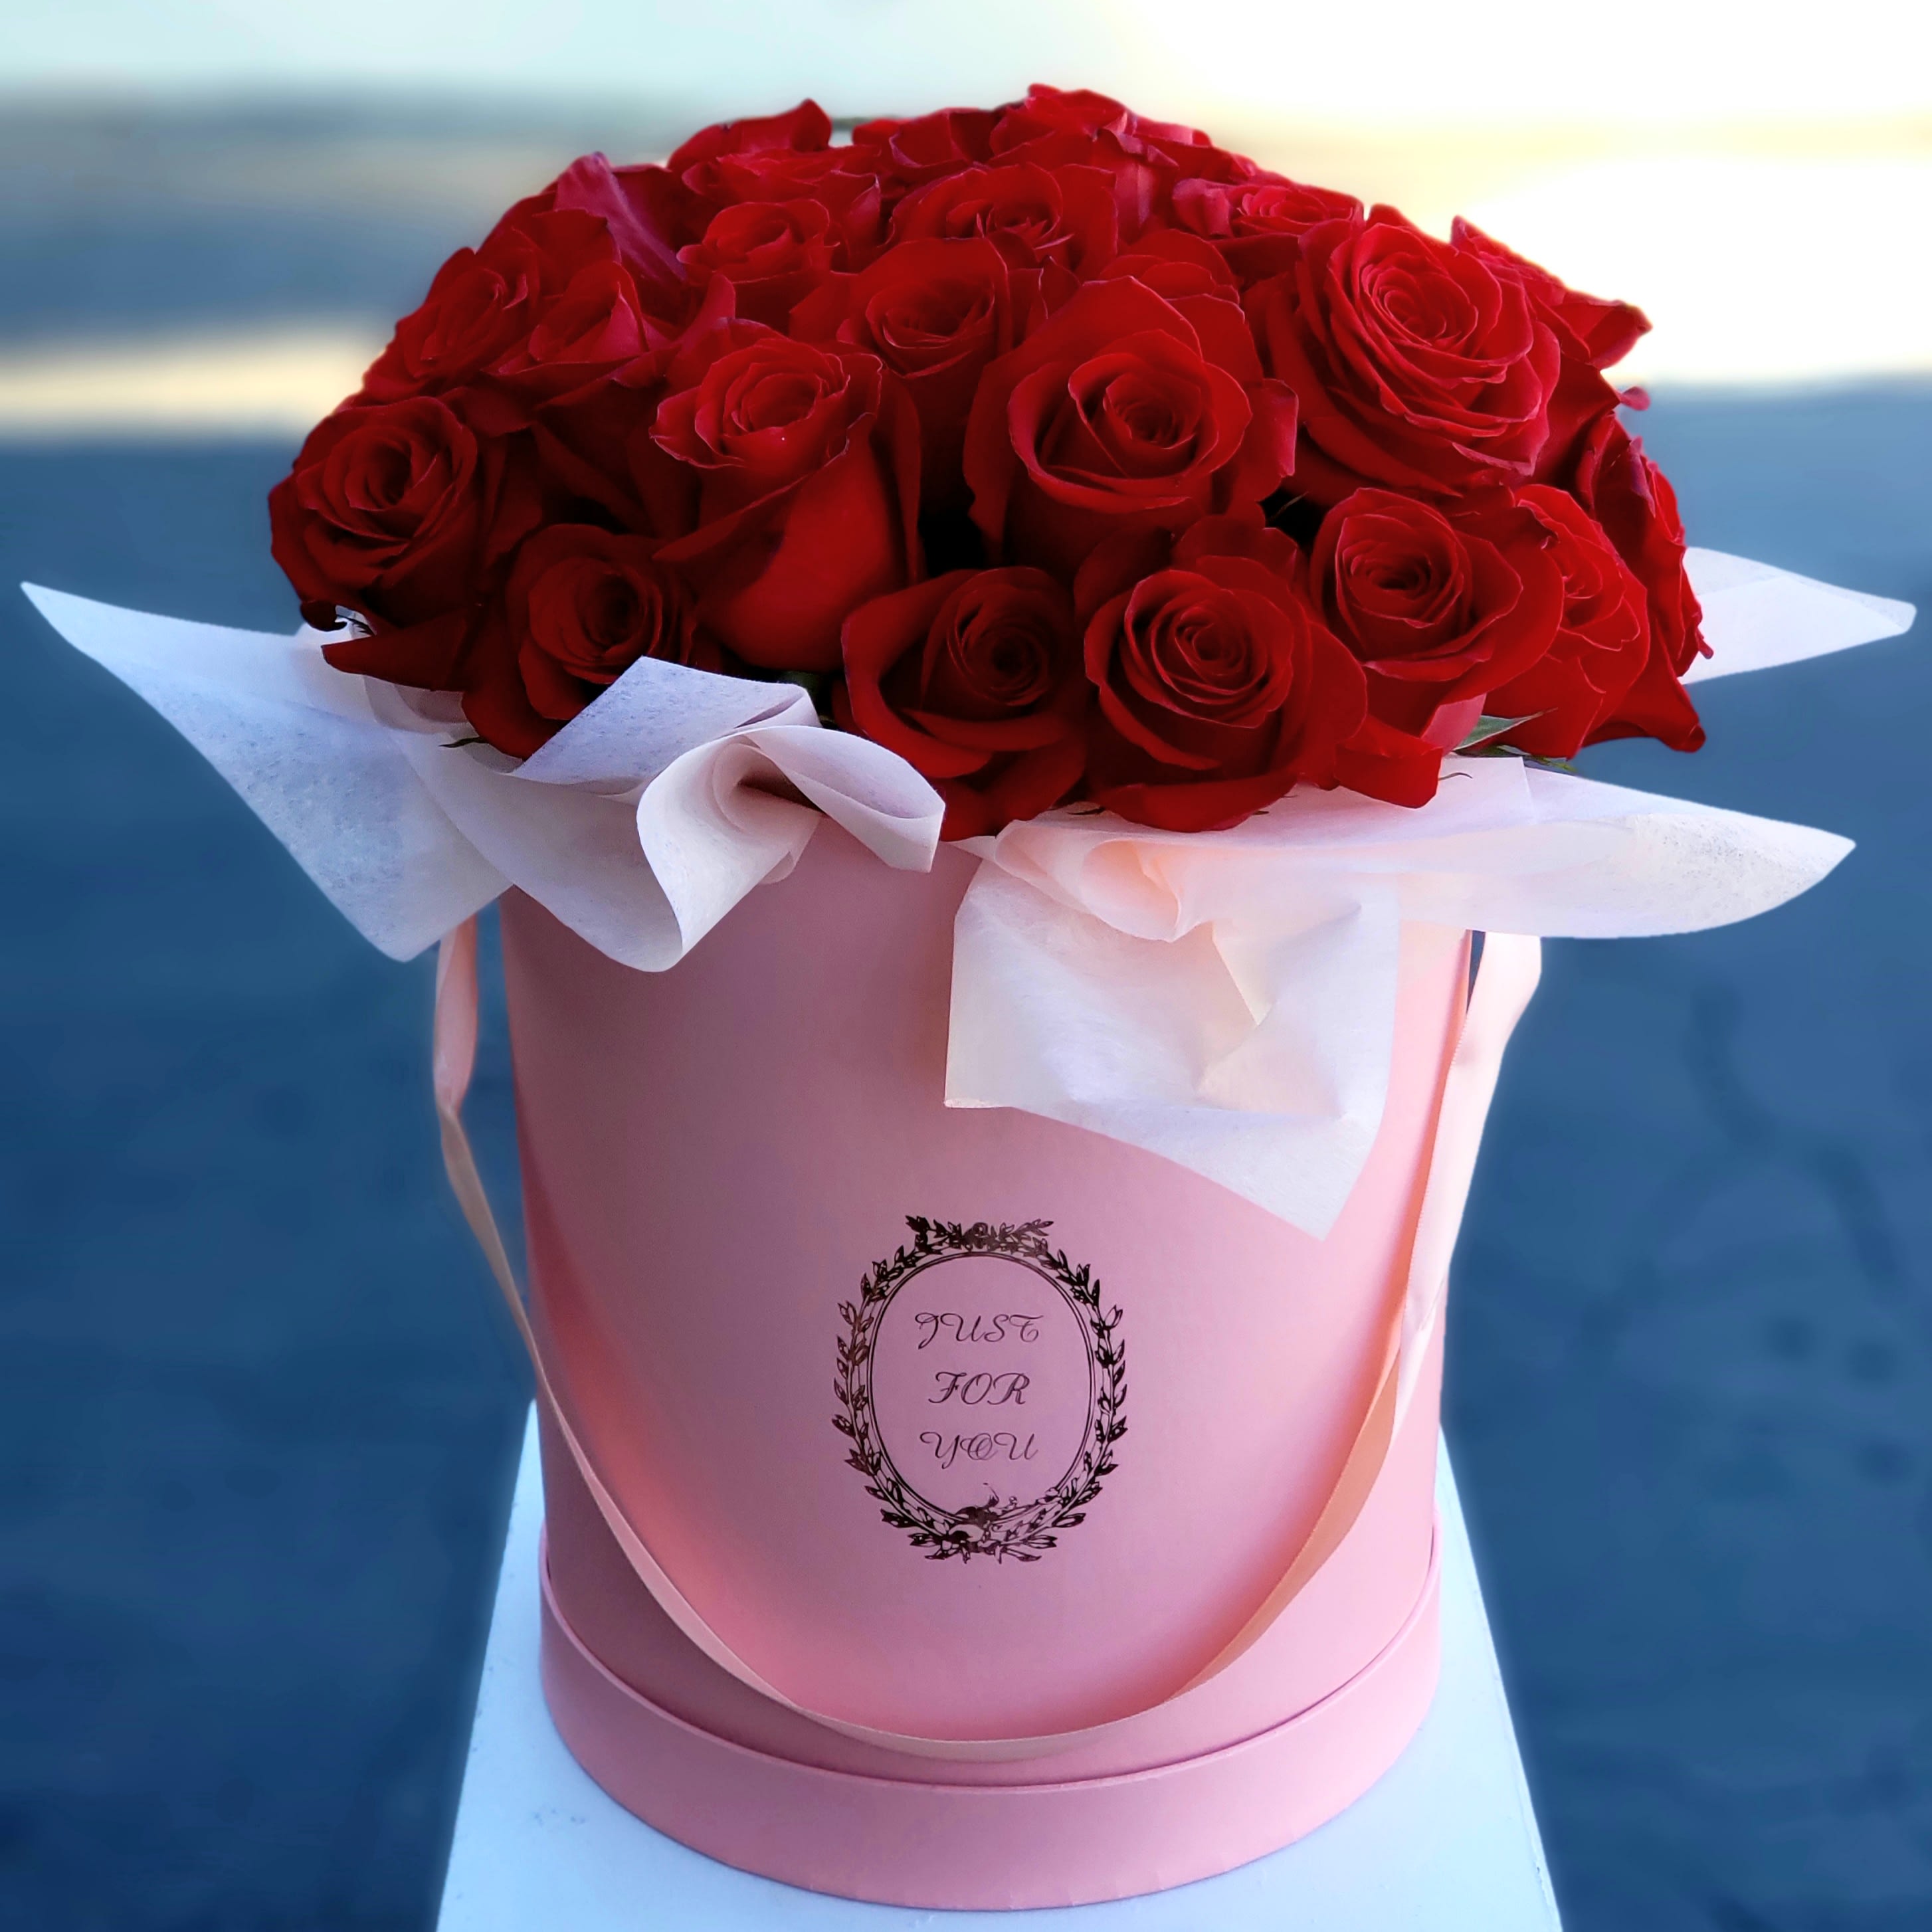 Rose Bucket of Love - Make hearts skip a beat this Valentine's Day (and beyond!) with our &quot;Rose Bucket of Love&quot; explosion of breathtaking red roses, delivered fresh from your local Los Angeles florist! This isn't just a bouquet, it's a statement – a passionate cascade of velvety crimson blooms radiating romance, desire, and undying love.  Imagine:  A generous bucket overflowing with over [specify number] premium red roses. Each petal whispers promises of devotion, their intoxicating fragrance filling the air with a heady allure. The vibrant hue of love itself, symbolizing passion, fire, and a commitment that burns bright. Freshness guaranteed, hand-picked by our Los Angeles floral artisans and delivered right to your door, ensuring stunning blooms that speak volumes for days. A versatile symbol of affection: perfect for Valentine's Day, anniversaries, birthdays, romantic gestures, or simply saying &quot;I love you&quot; in the grandest way imaginable. Upgrade your romance game with &quot;Love by the Bucket&quot;:  Add a personalized touch: Include a handwritten card with your heartfelt message, chocolates, or a cuddly teddy bear for an extra-special surprise. Same-day delivery in Los Angeles: No last-minute scrambling! We'll ensure your fiery declaration of love arrives right on time. Impress beyond Valentine's Day: This bucket isn't just for February 14th. Birthdays, anniversaries, any day you want to set hearts ablaze – &quot;Rose Bucket of Love&quot; is always the perfect answer. Order your &quot;Rose Bucket of Love&quot; red rose explosion today and let the language of flowers speak volumes for you!